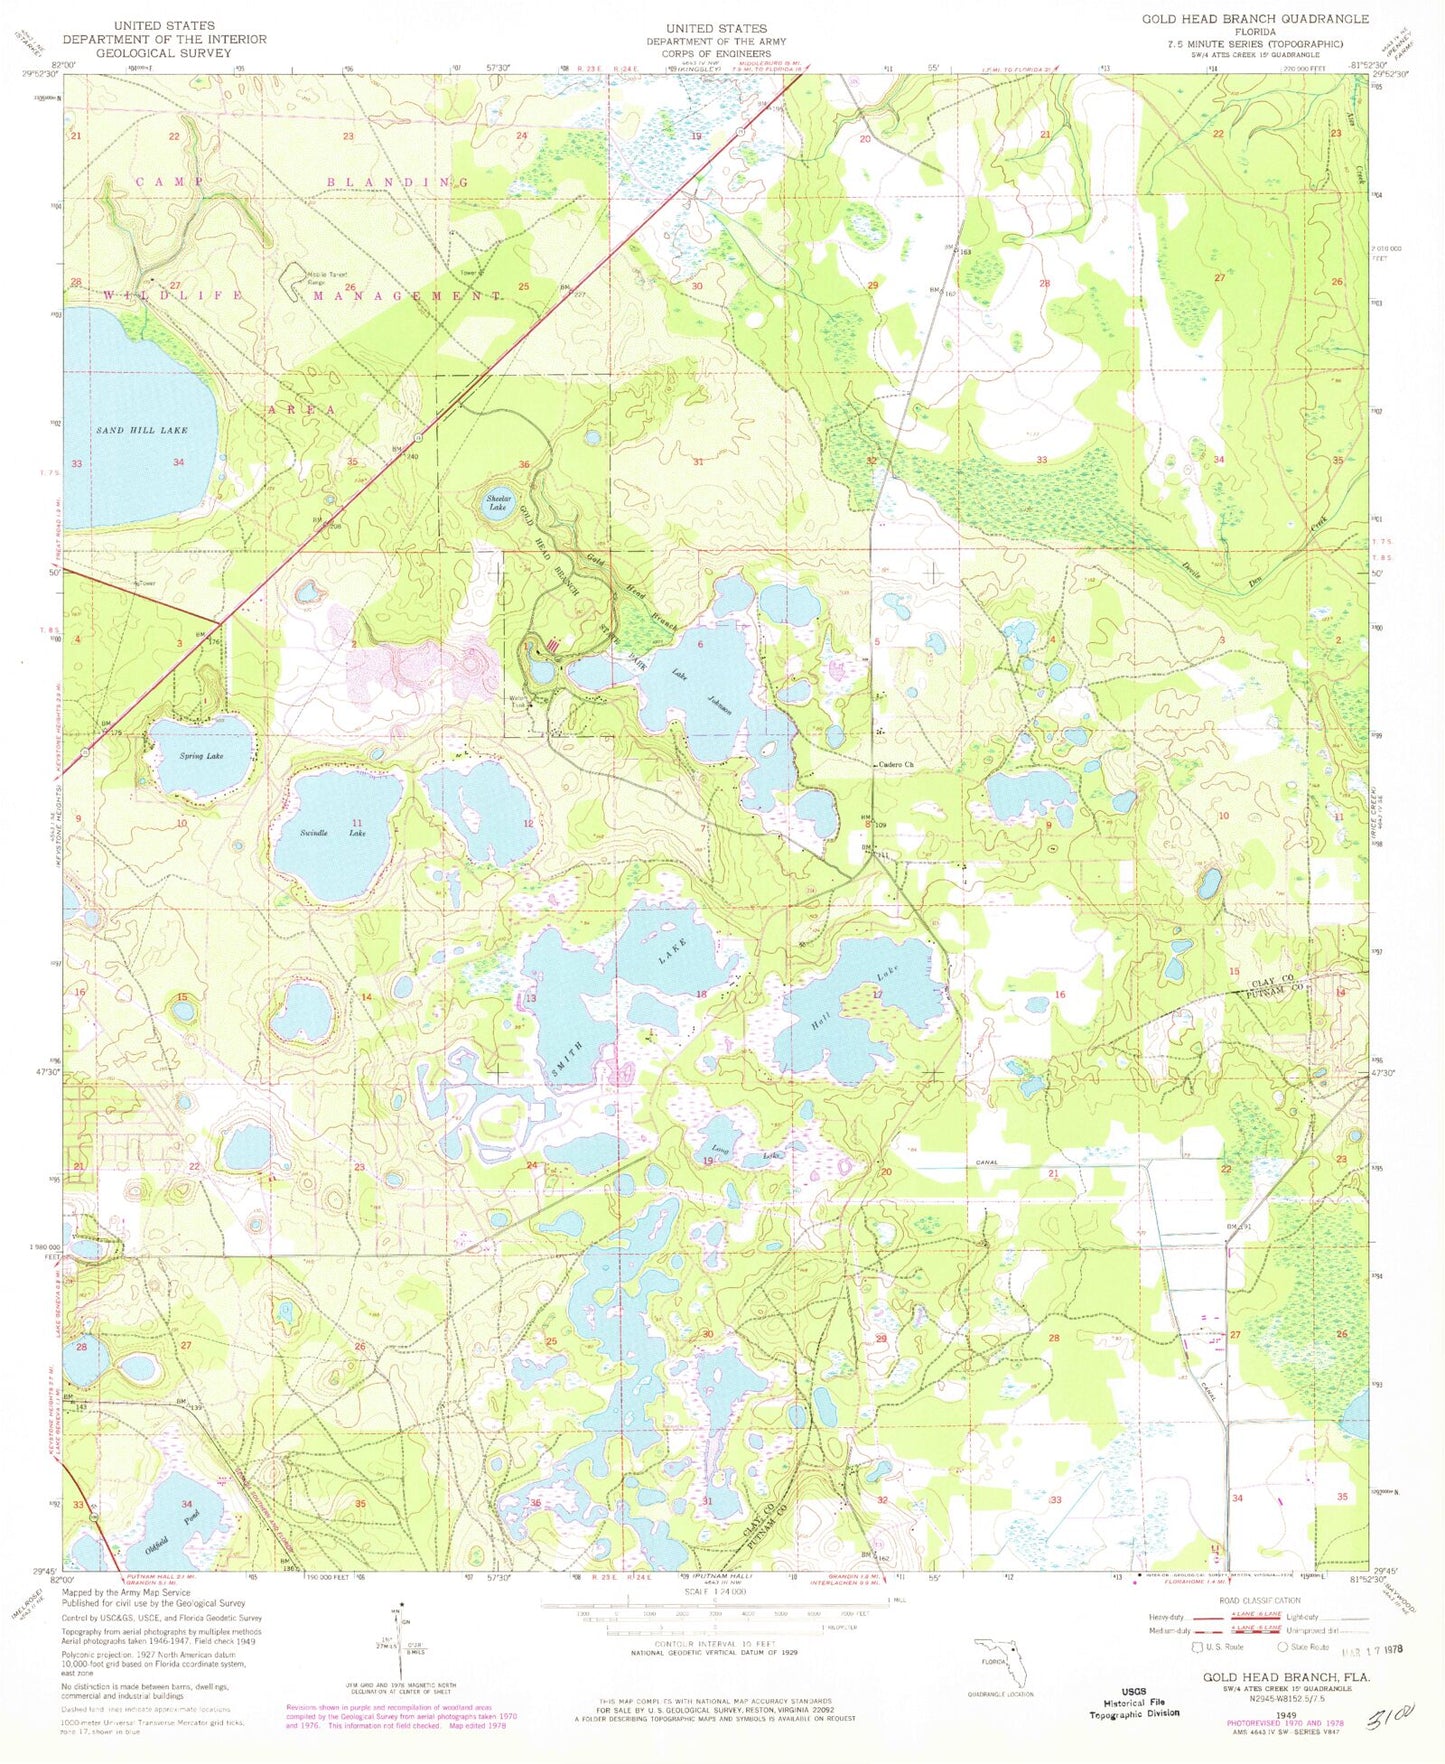 Classic USGS Gold Head Branch Florida 7.5'x7.5' Topo Map Image